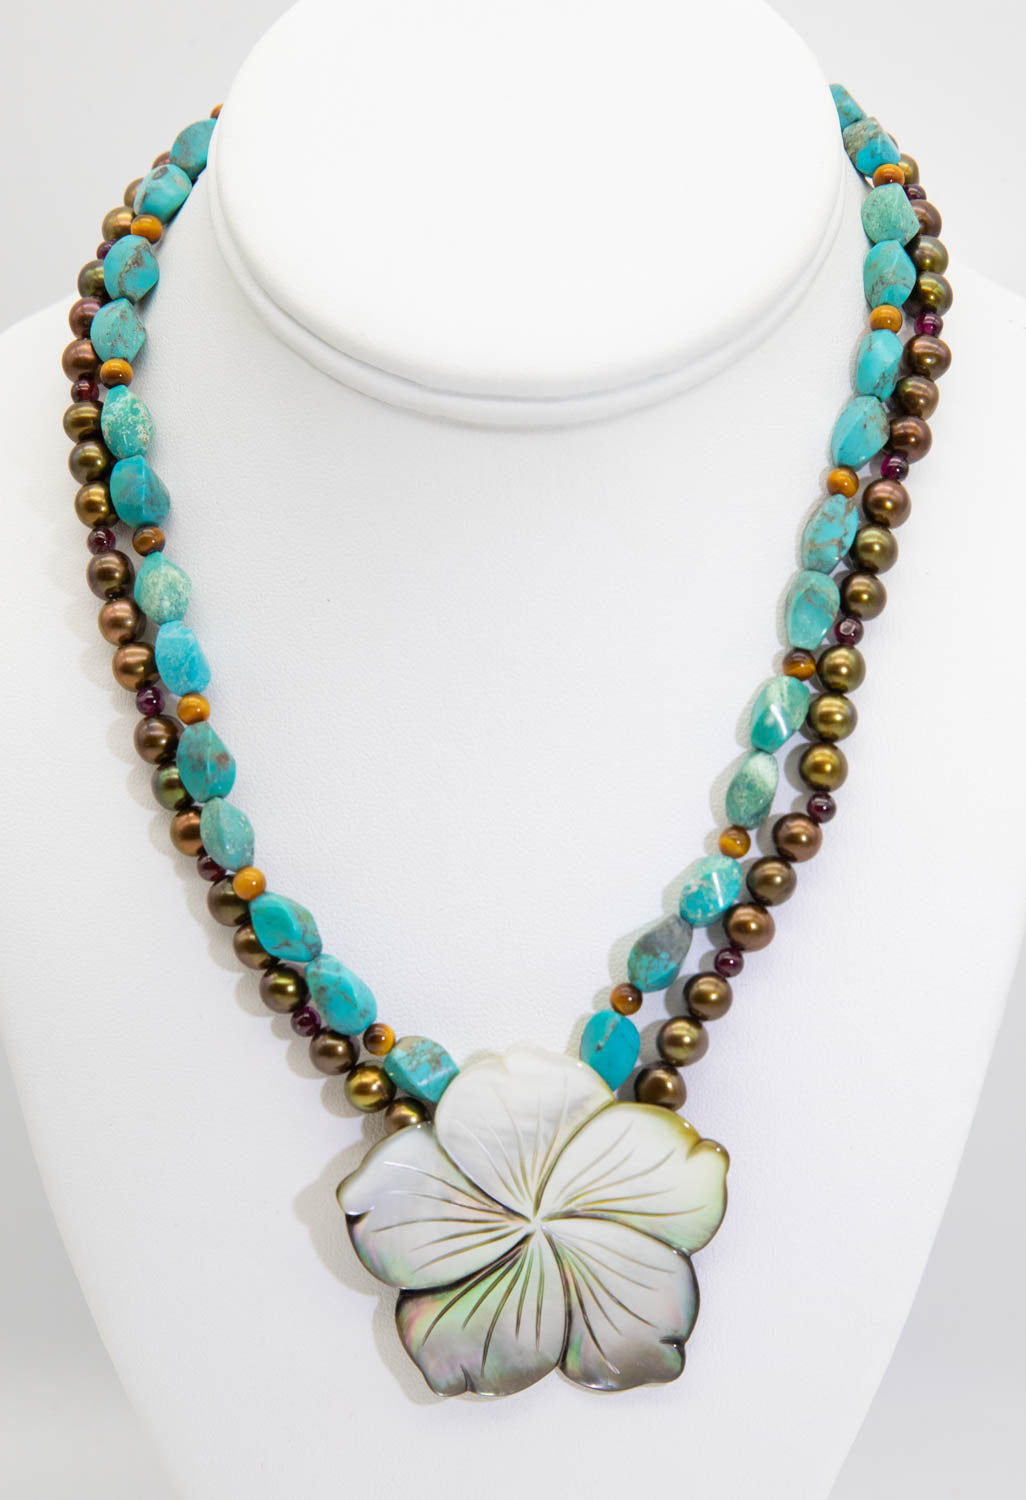 Vintage Mother of Pearl Flower Bead Necklace  - JD10792